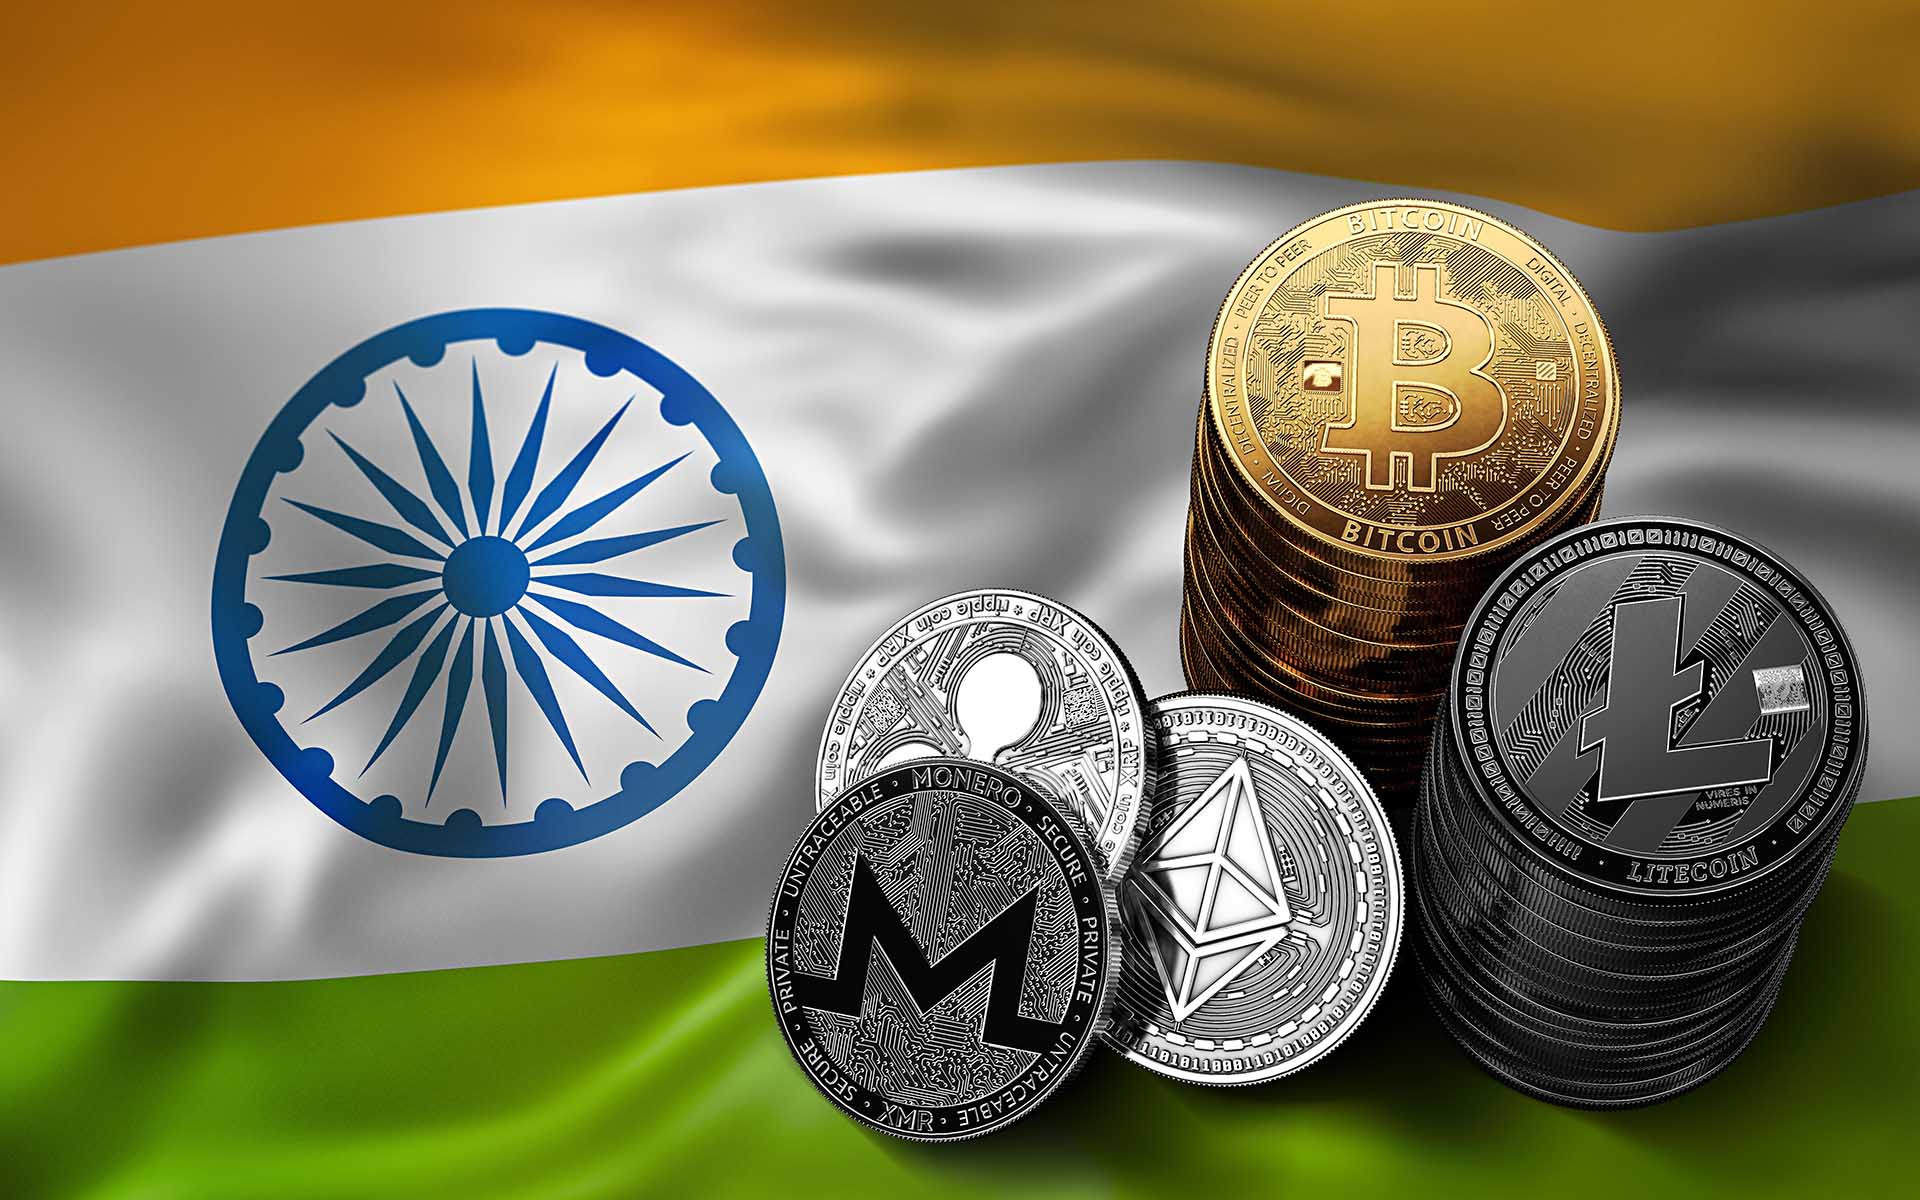 Alleged Suspicious Activities Lead to the Suspension of Top Indian Exchanges